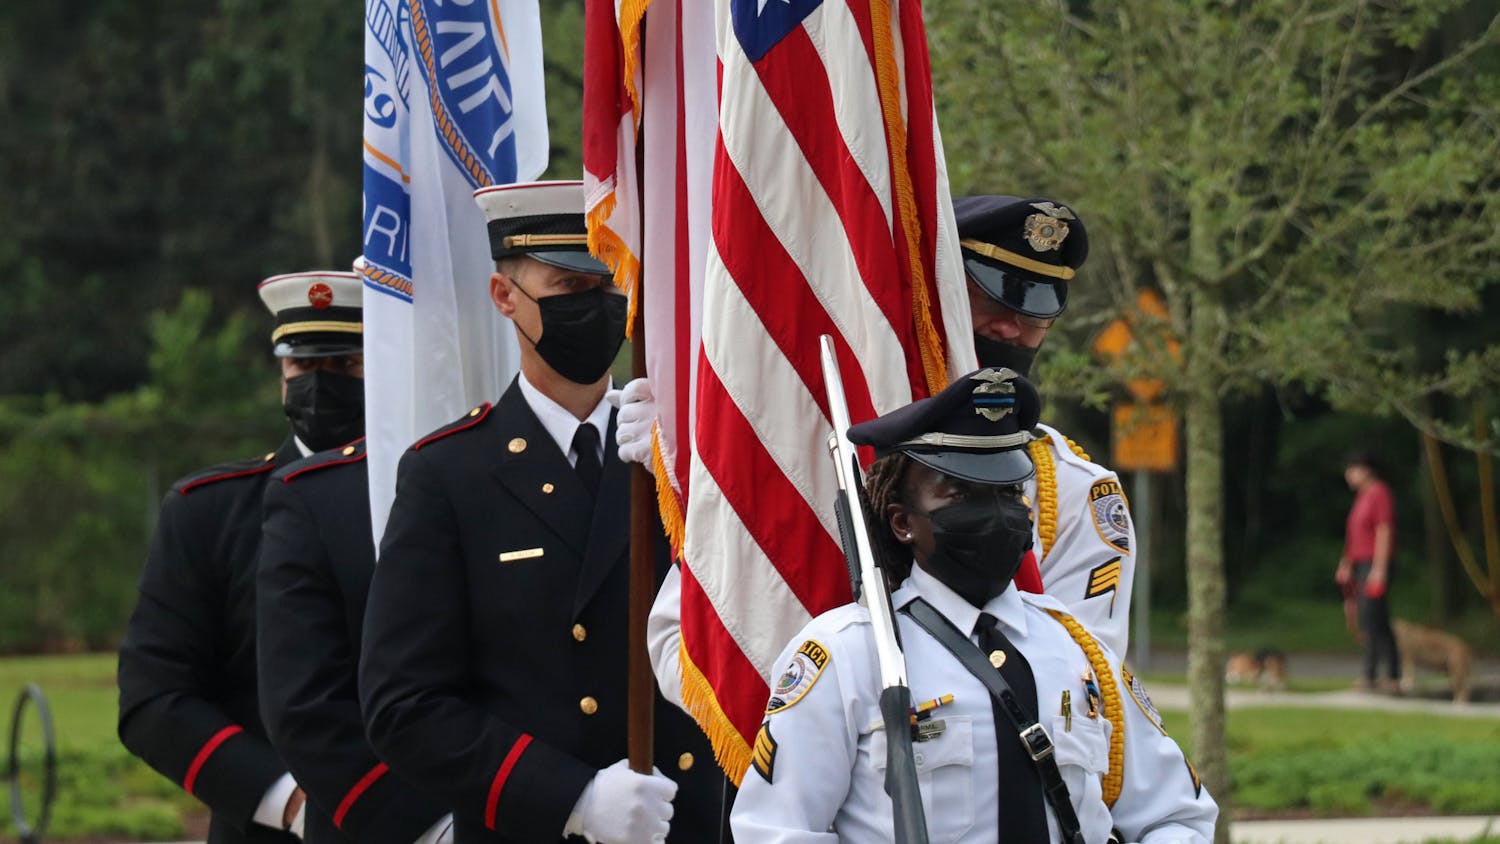 The Gainesville Fire Rescue and Gainesville Police Department joint honor guard does a presentation of colors at Reserve Park on Saturday, Sept. 11, 2021. The three flags represent the city, state and country (from left to right).